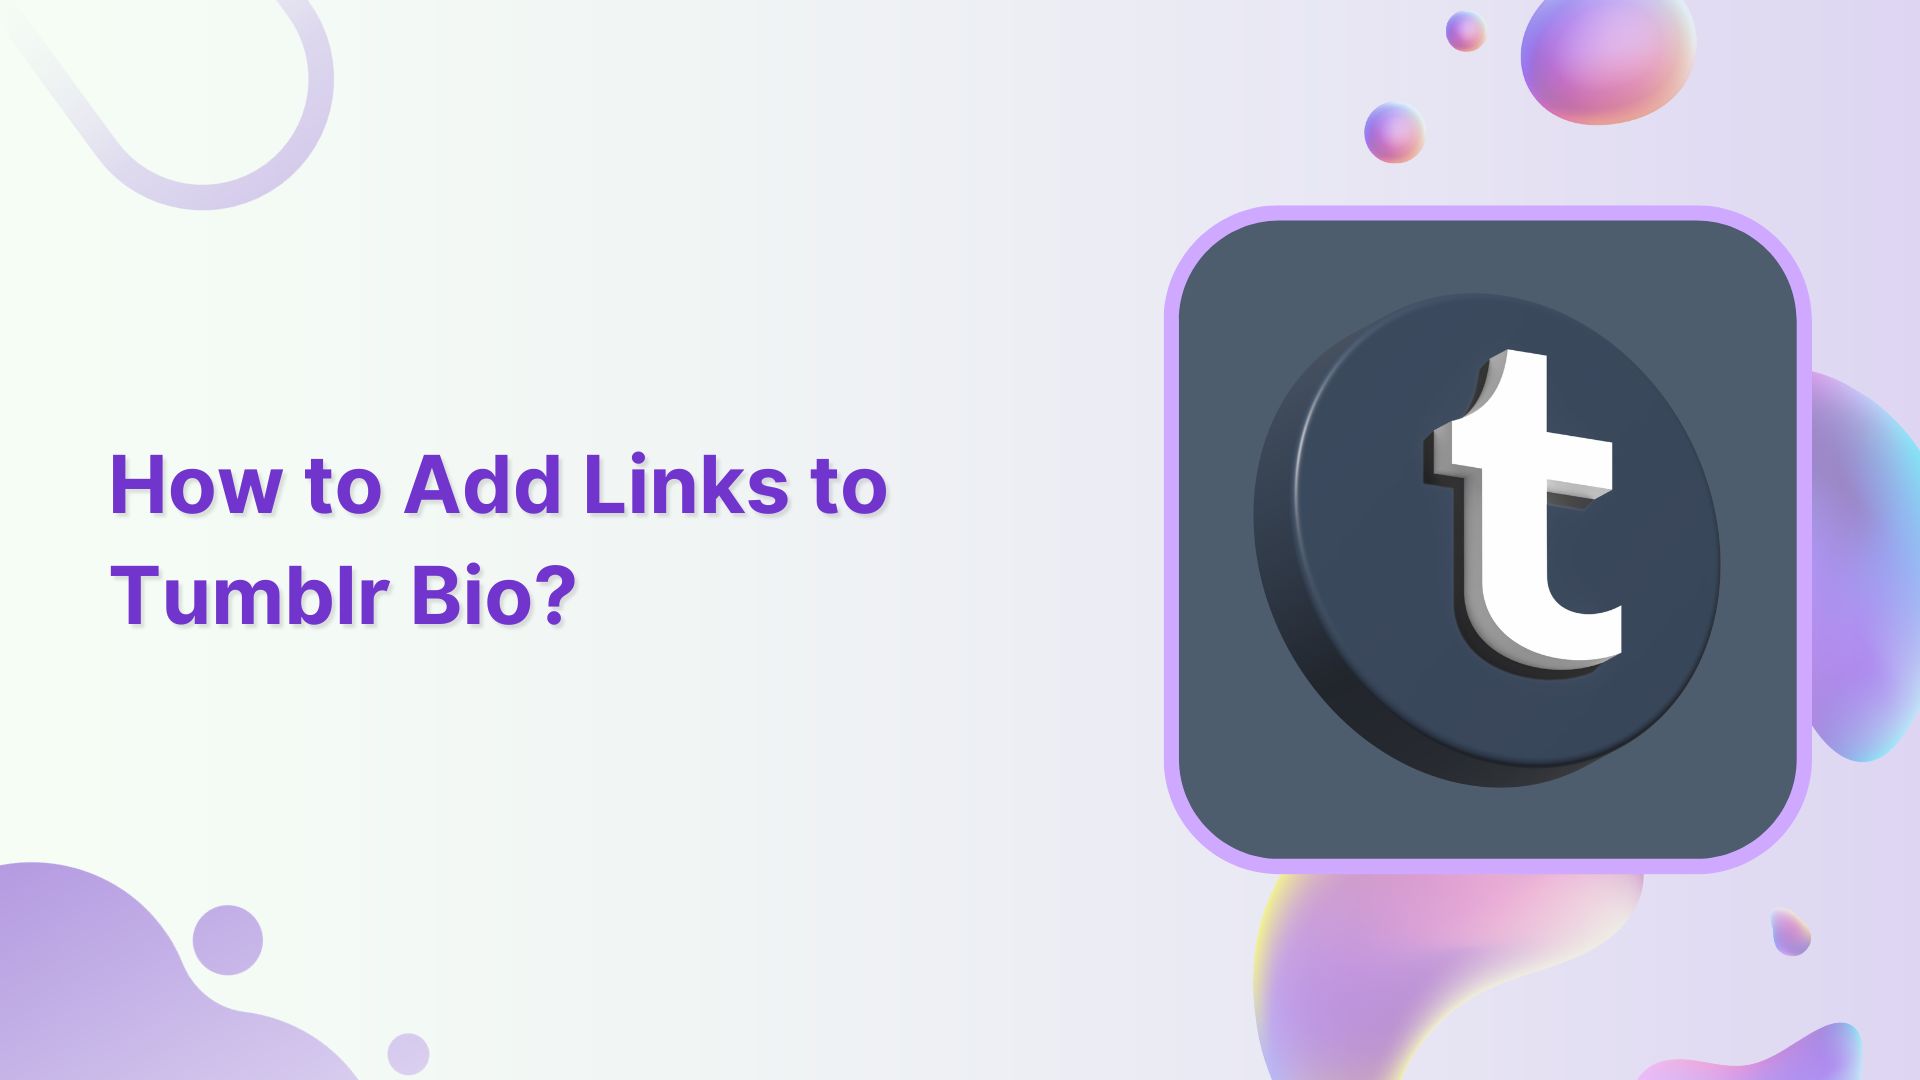 How to Add Links to Tumblr Bio: Step-by-Step Guide